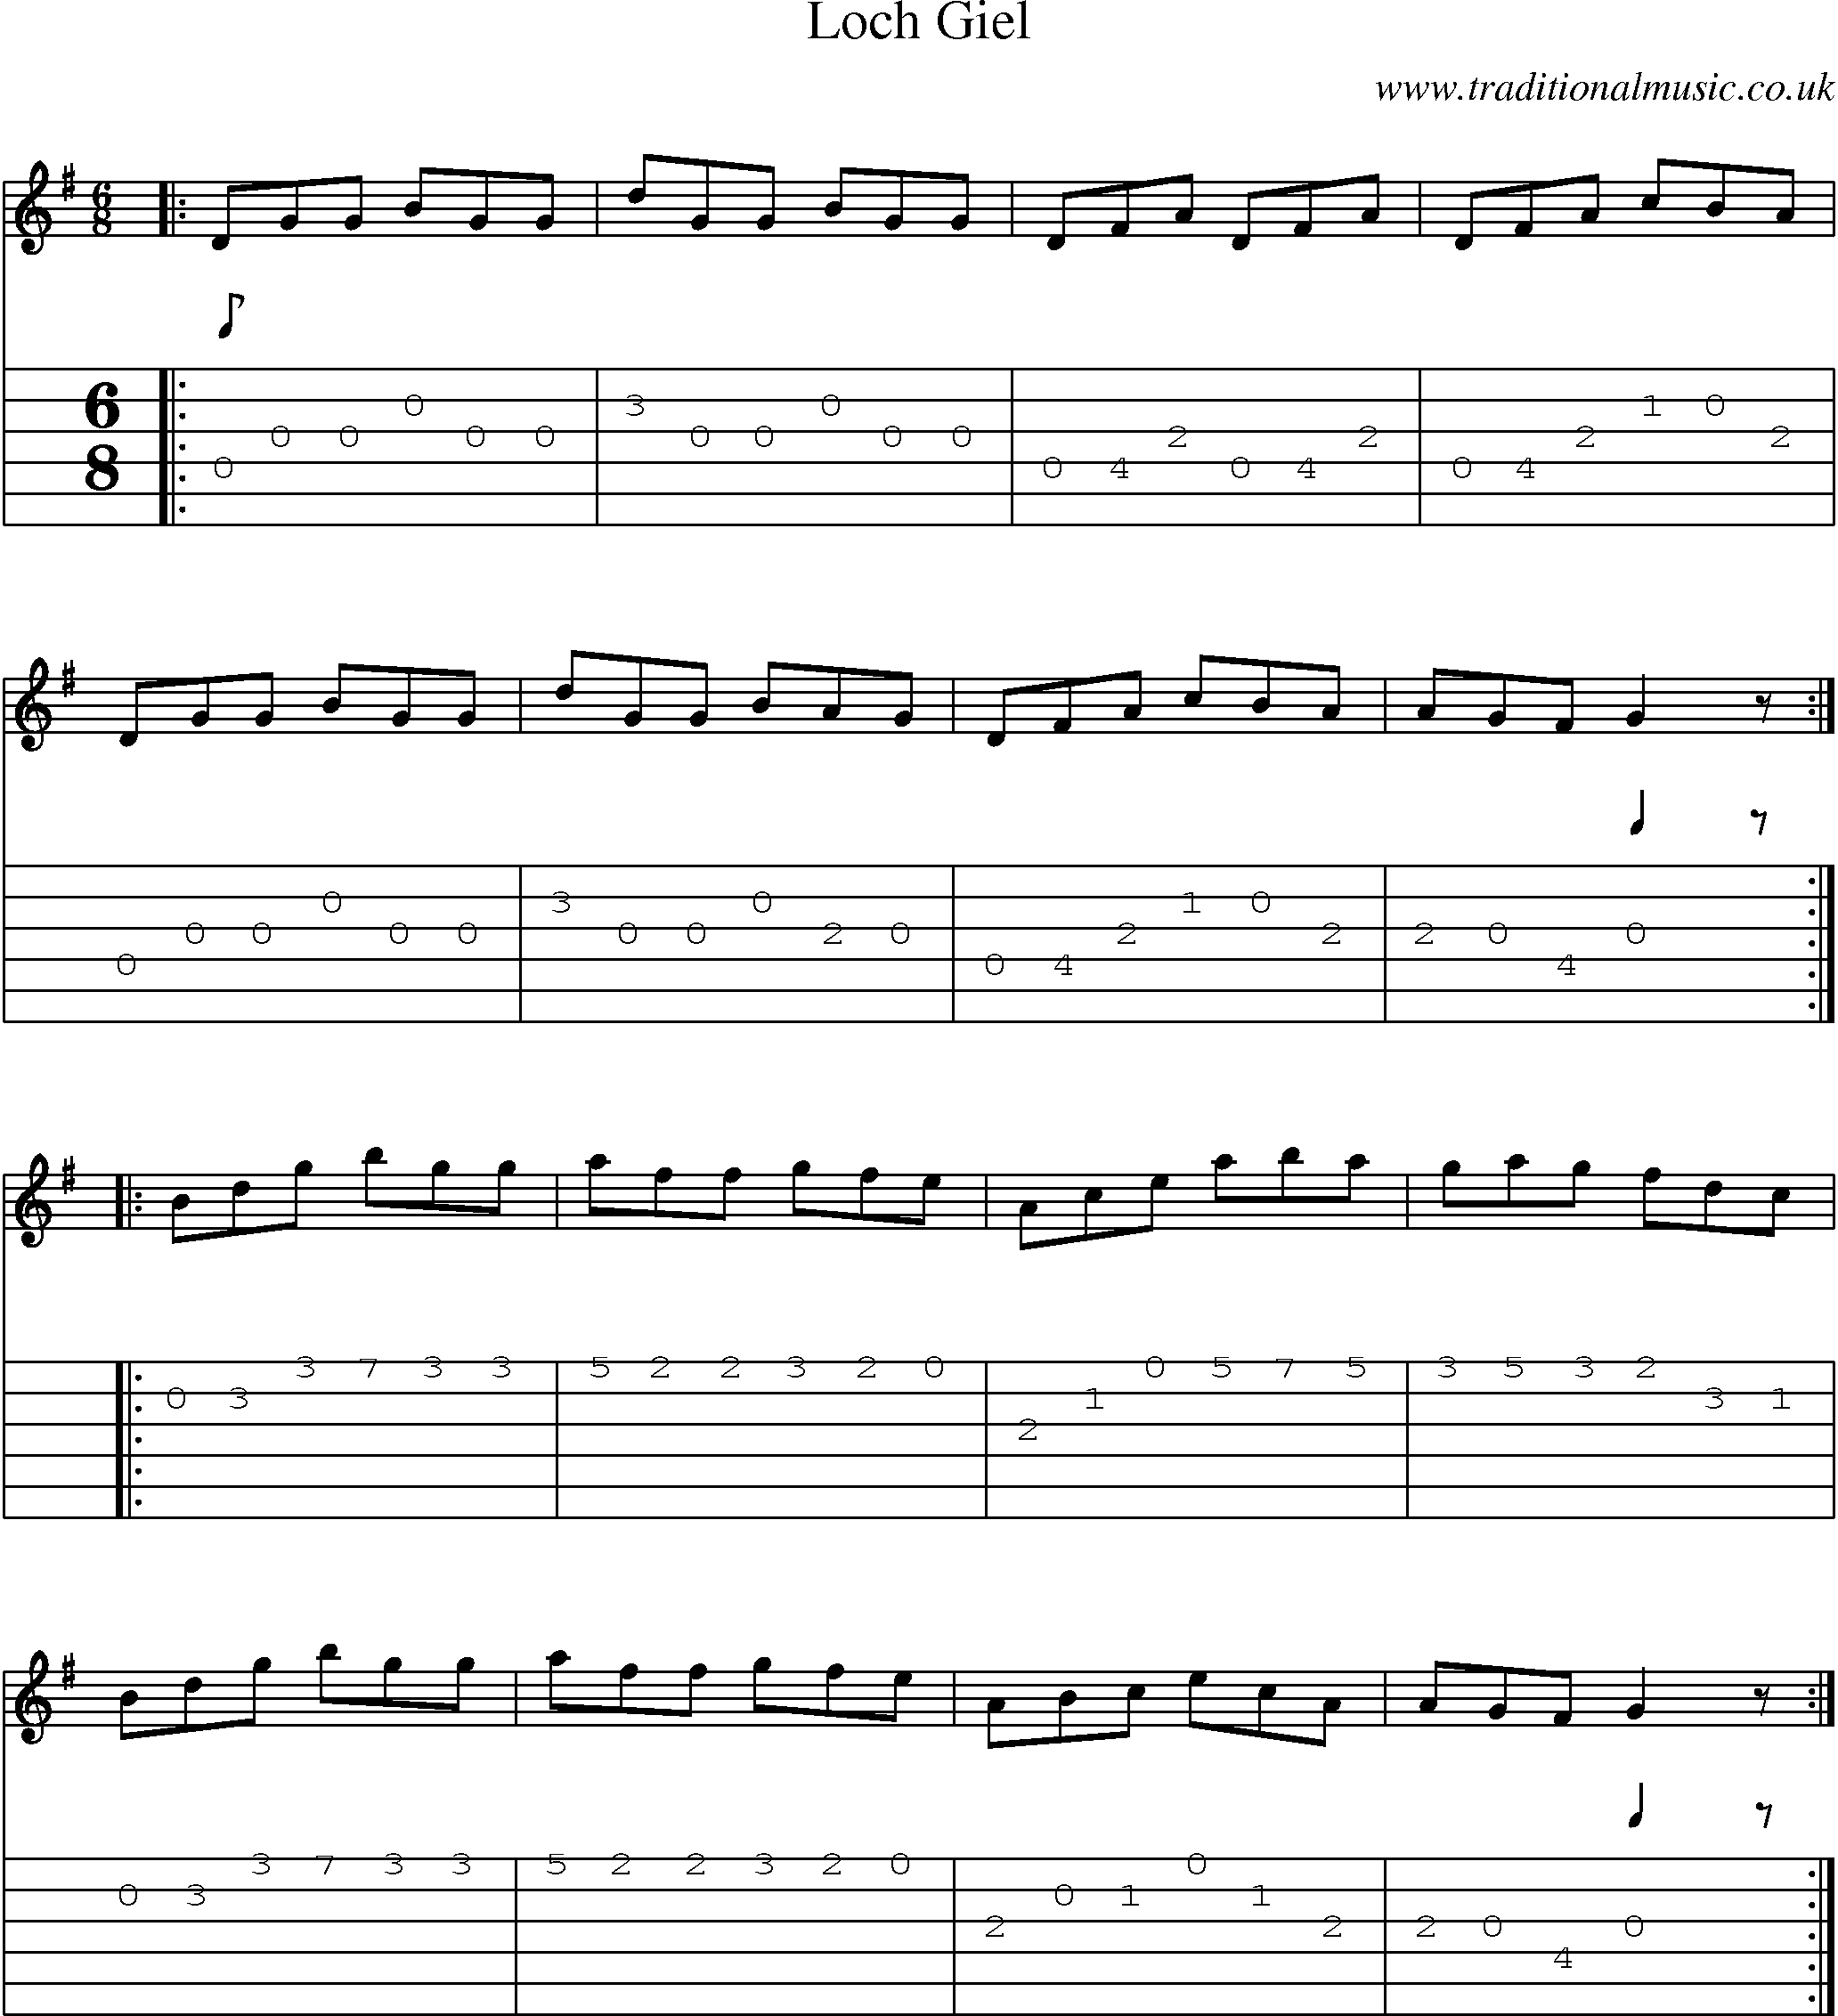 Music Score and Guitar Tabs for Loch Giel